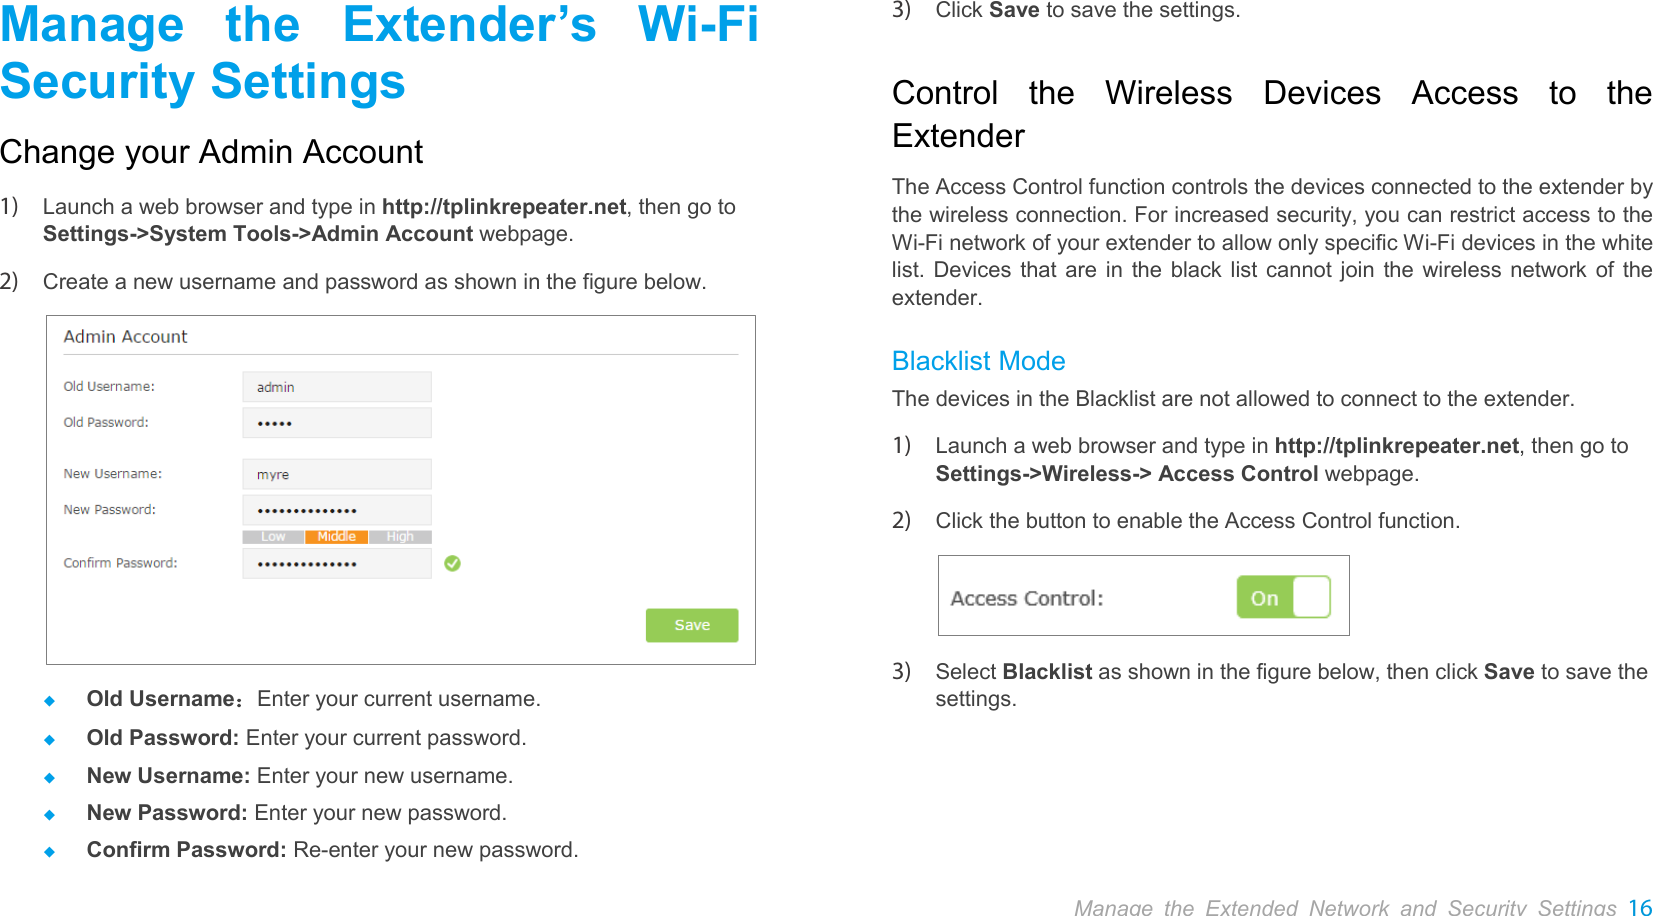  Manage the Extender’s Wi-Fi Security Settings Change your Admin Account 1) Launch a web browser and type in http://tplinkrepeater.net, then go to Settings-&gt;System Tools-&gt;Admin Account webpage. 2) Create a new username and password as shown in the figure below.   Old Username：Enter your current username.  Old Password: Enter your current password.  New Username: Enter your new username.  New Password: Enter your new password.  Confirm Password: Re-enter your new password. 3) Click Save to save the settings. Control the Wireless  Devices  Access to the Extender The Access Control function controls the devices connected to the extender by the wireless connection. For increased security, you can restrict access to the Wi-Fi network of your extender to allow only specific Wi-Fi devices in the white list. Devices that are in the black list cannot join the wireless network of the extender.   Blacklist Mode The devices in the Blacklist are not allowed to connect to the extender. 1) Launch a web browser and type in http://tplinkrepeater.net, then go to Settings-&gt;Wireless-&gt; Access Control webpage. 2) Click the button to enable the Access Control function.  3) Select Blacklist as shown in the figure below, then click Save to save the settings. Manage the Extended Network and Security Settings 16  